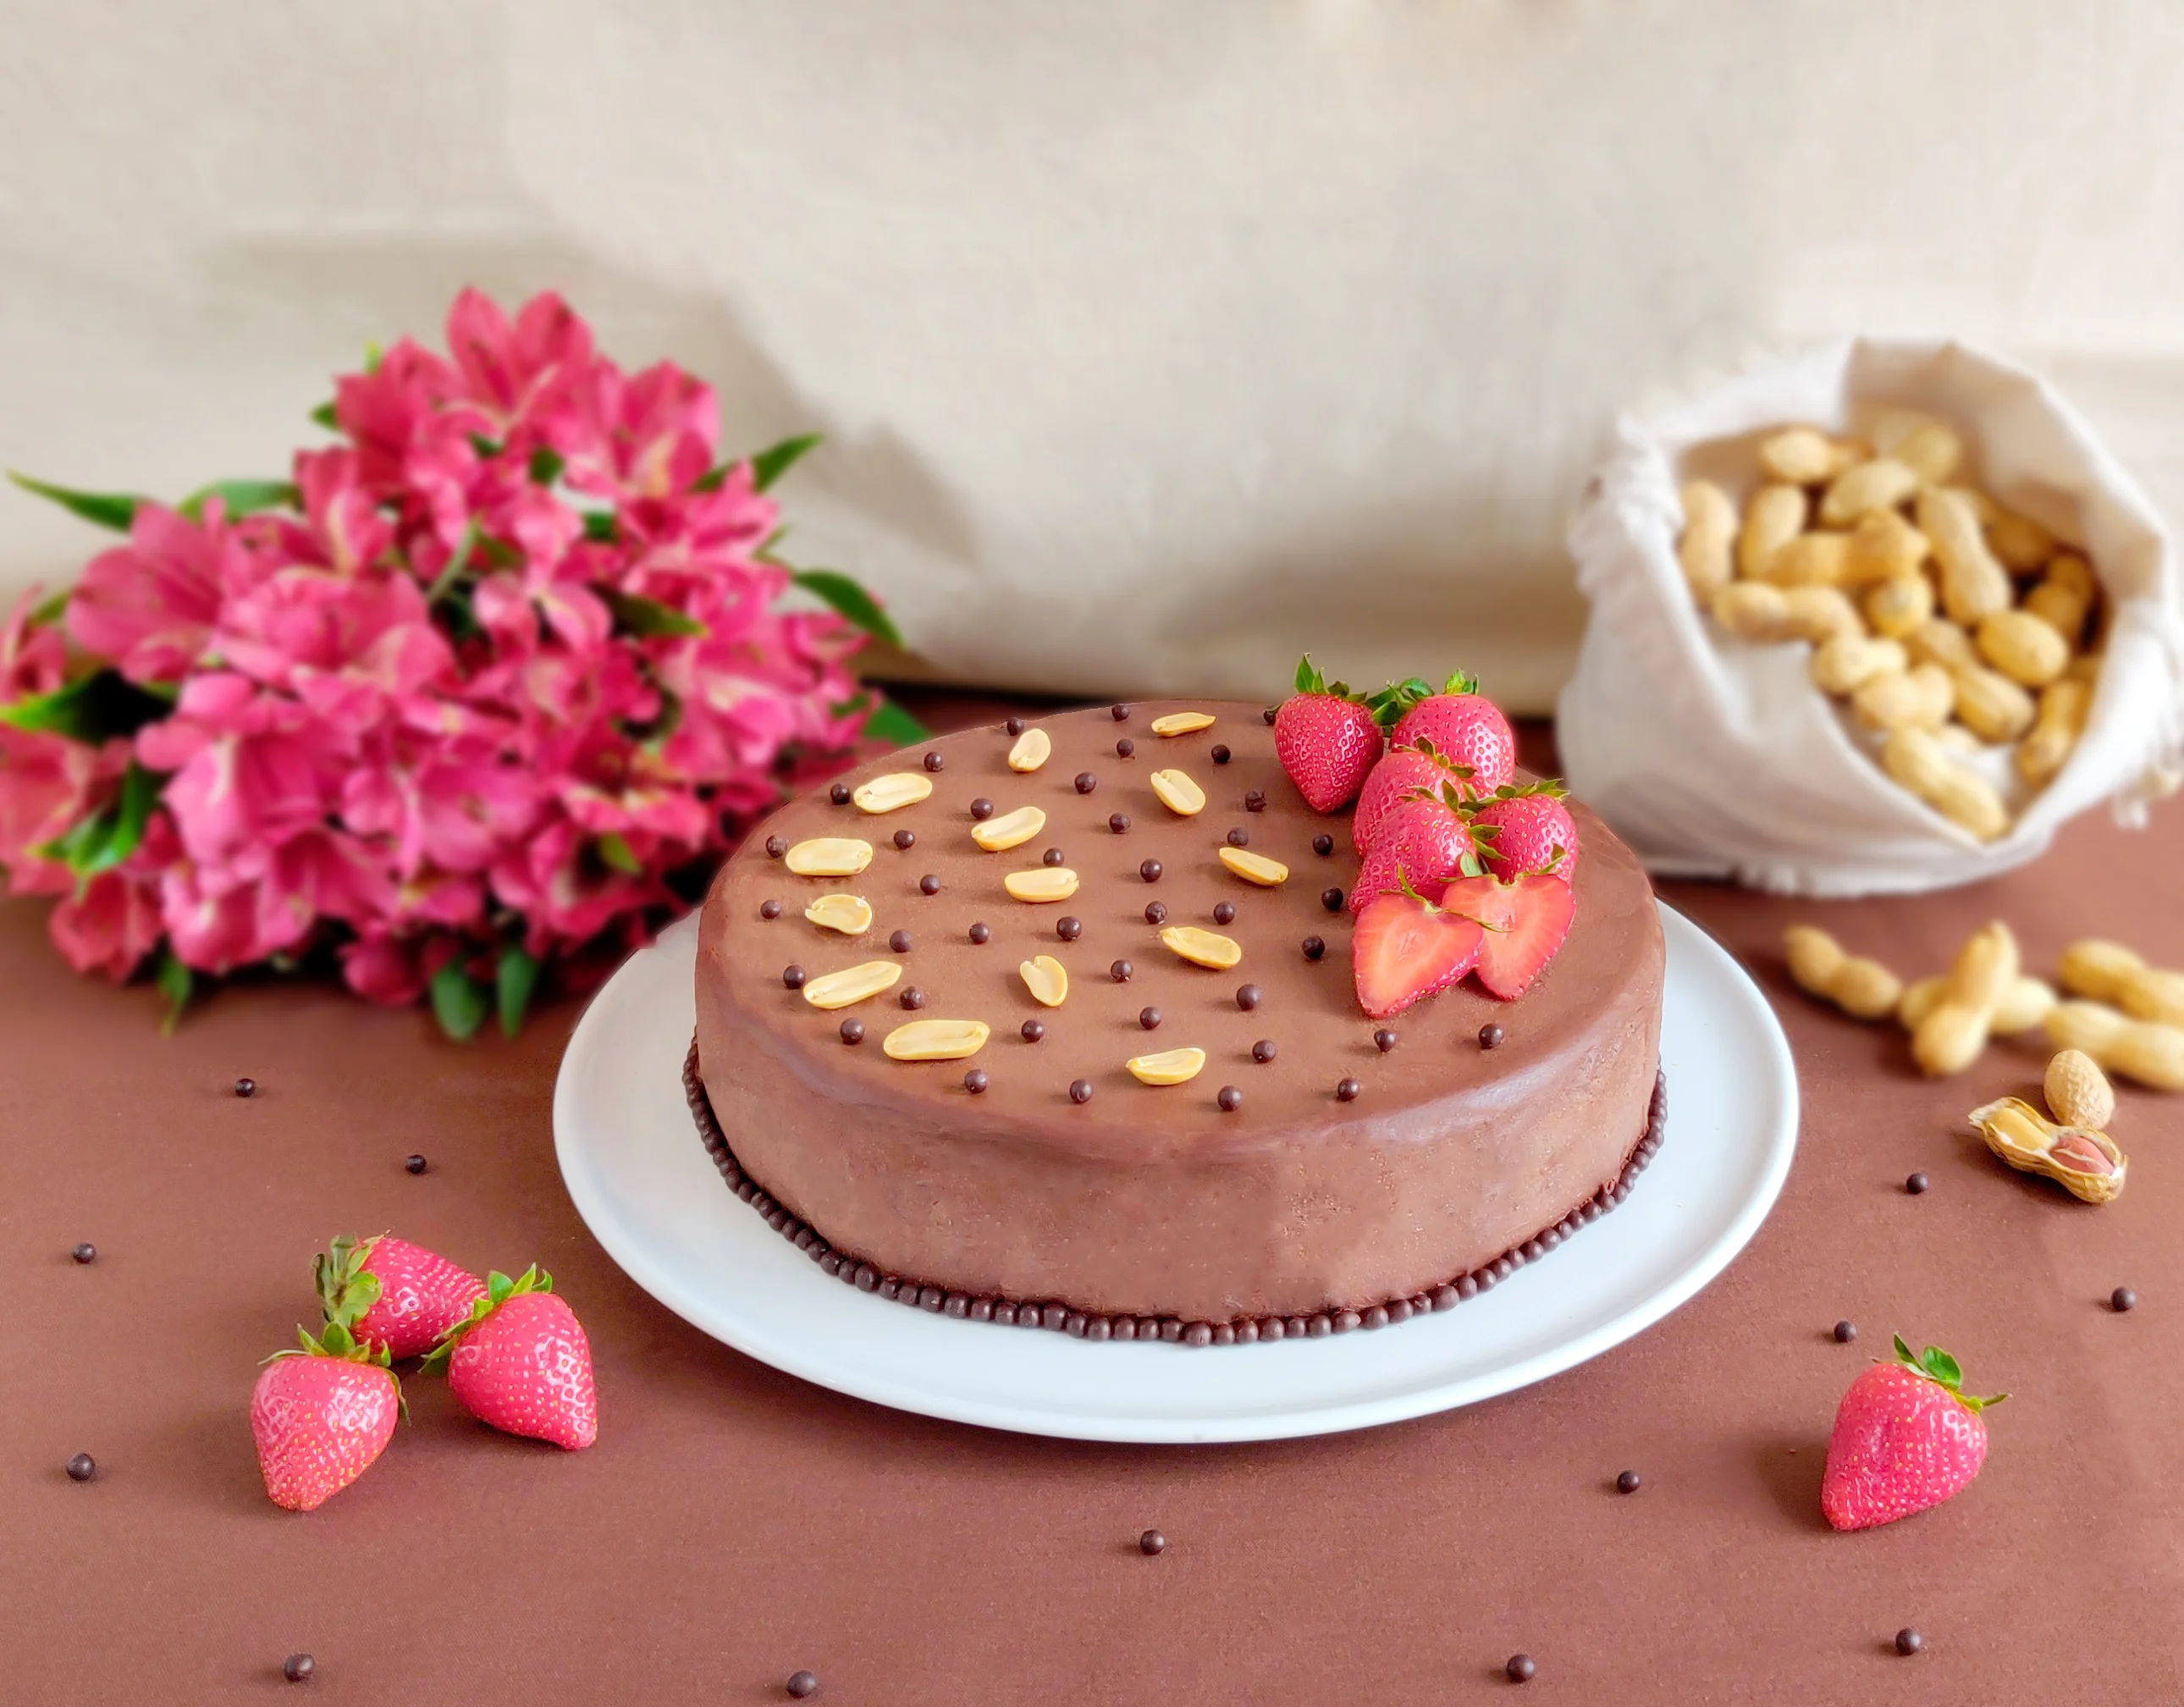 /assets/images/recipes/peanut-strawberry-chocolate-cheesecake/1.webp